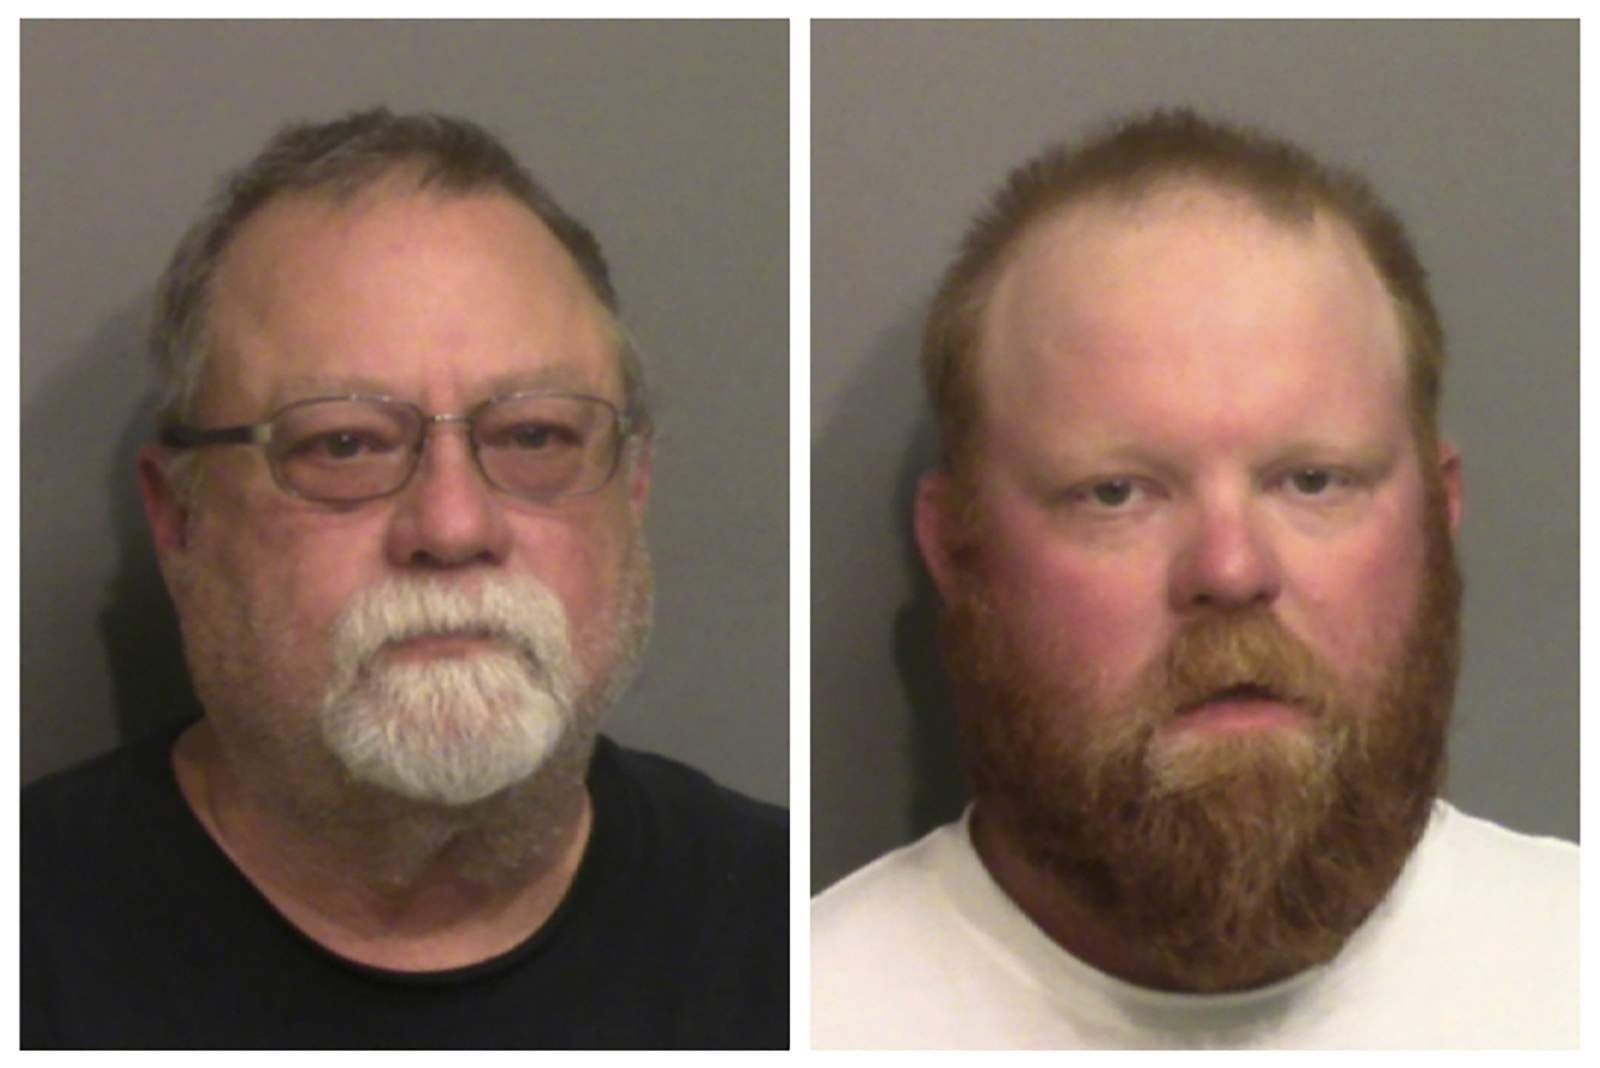 Attorneys for father, son charged in Ahmaud Arbery case file motions for bond